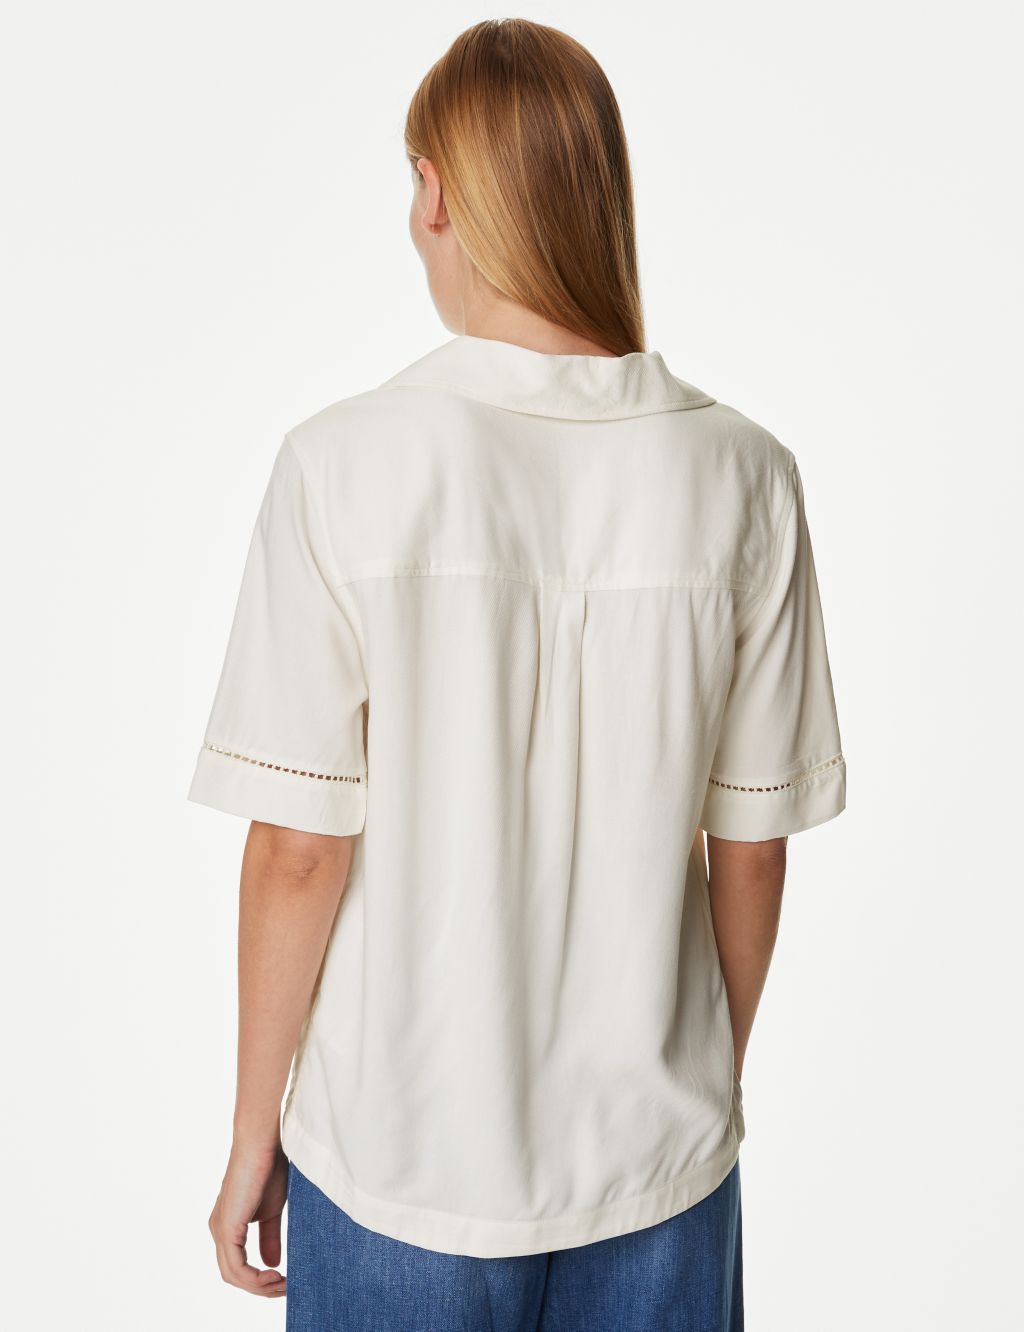 Collared Blouse image 5